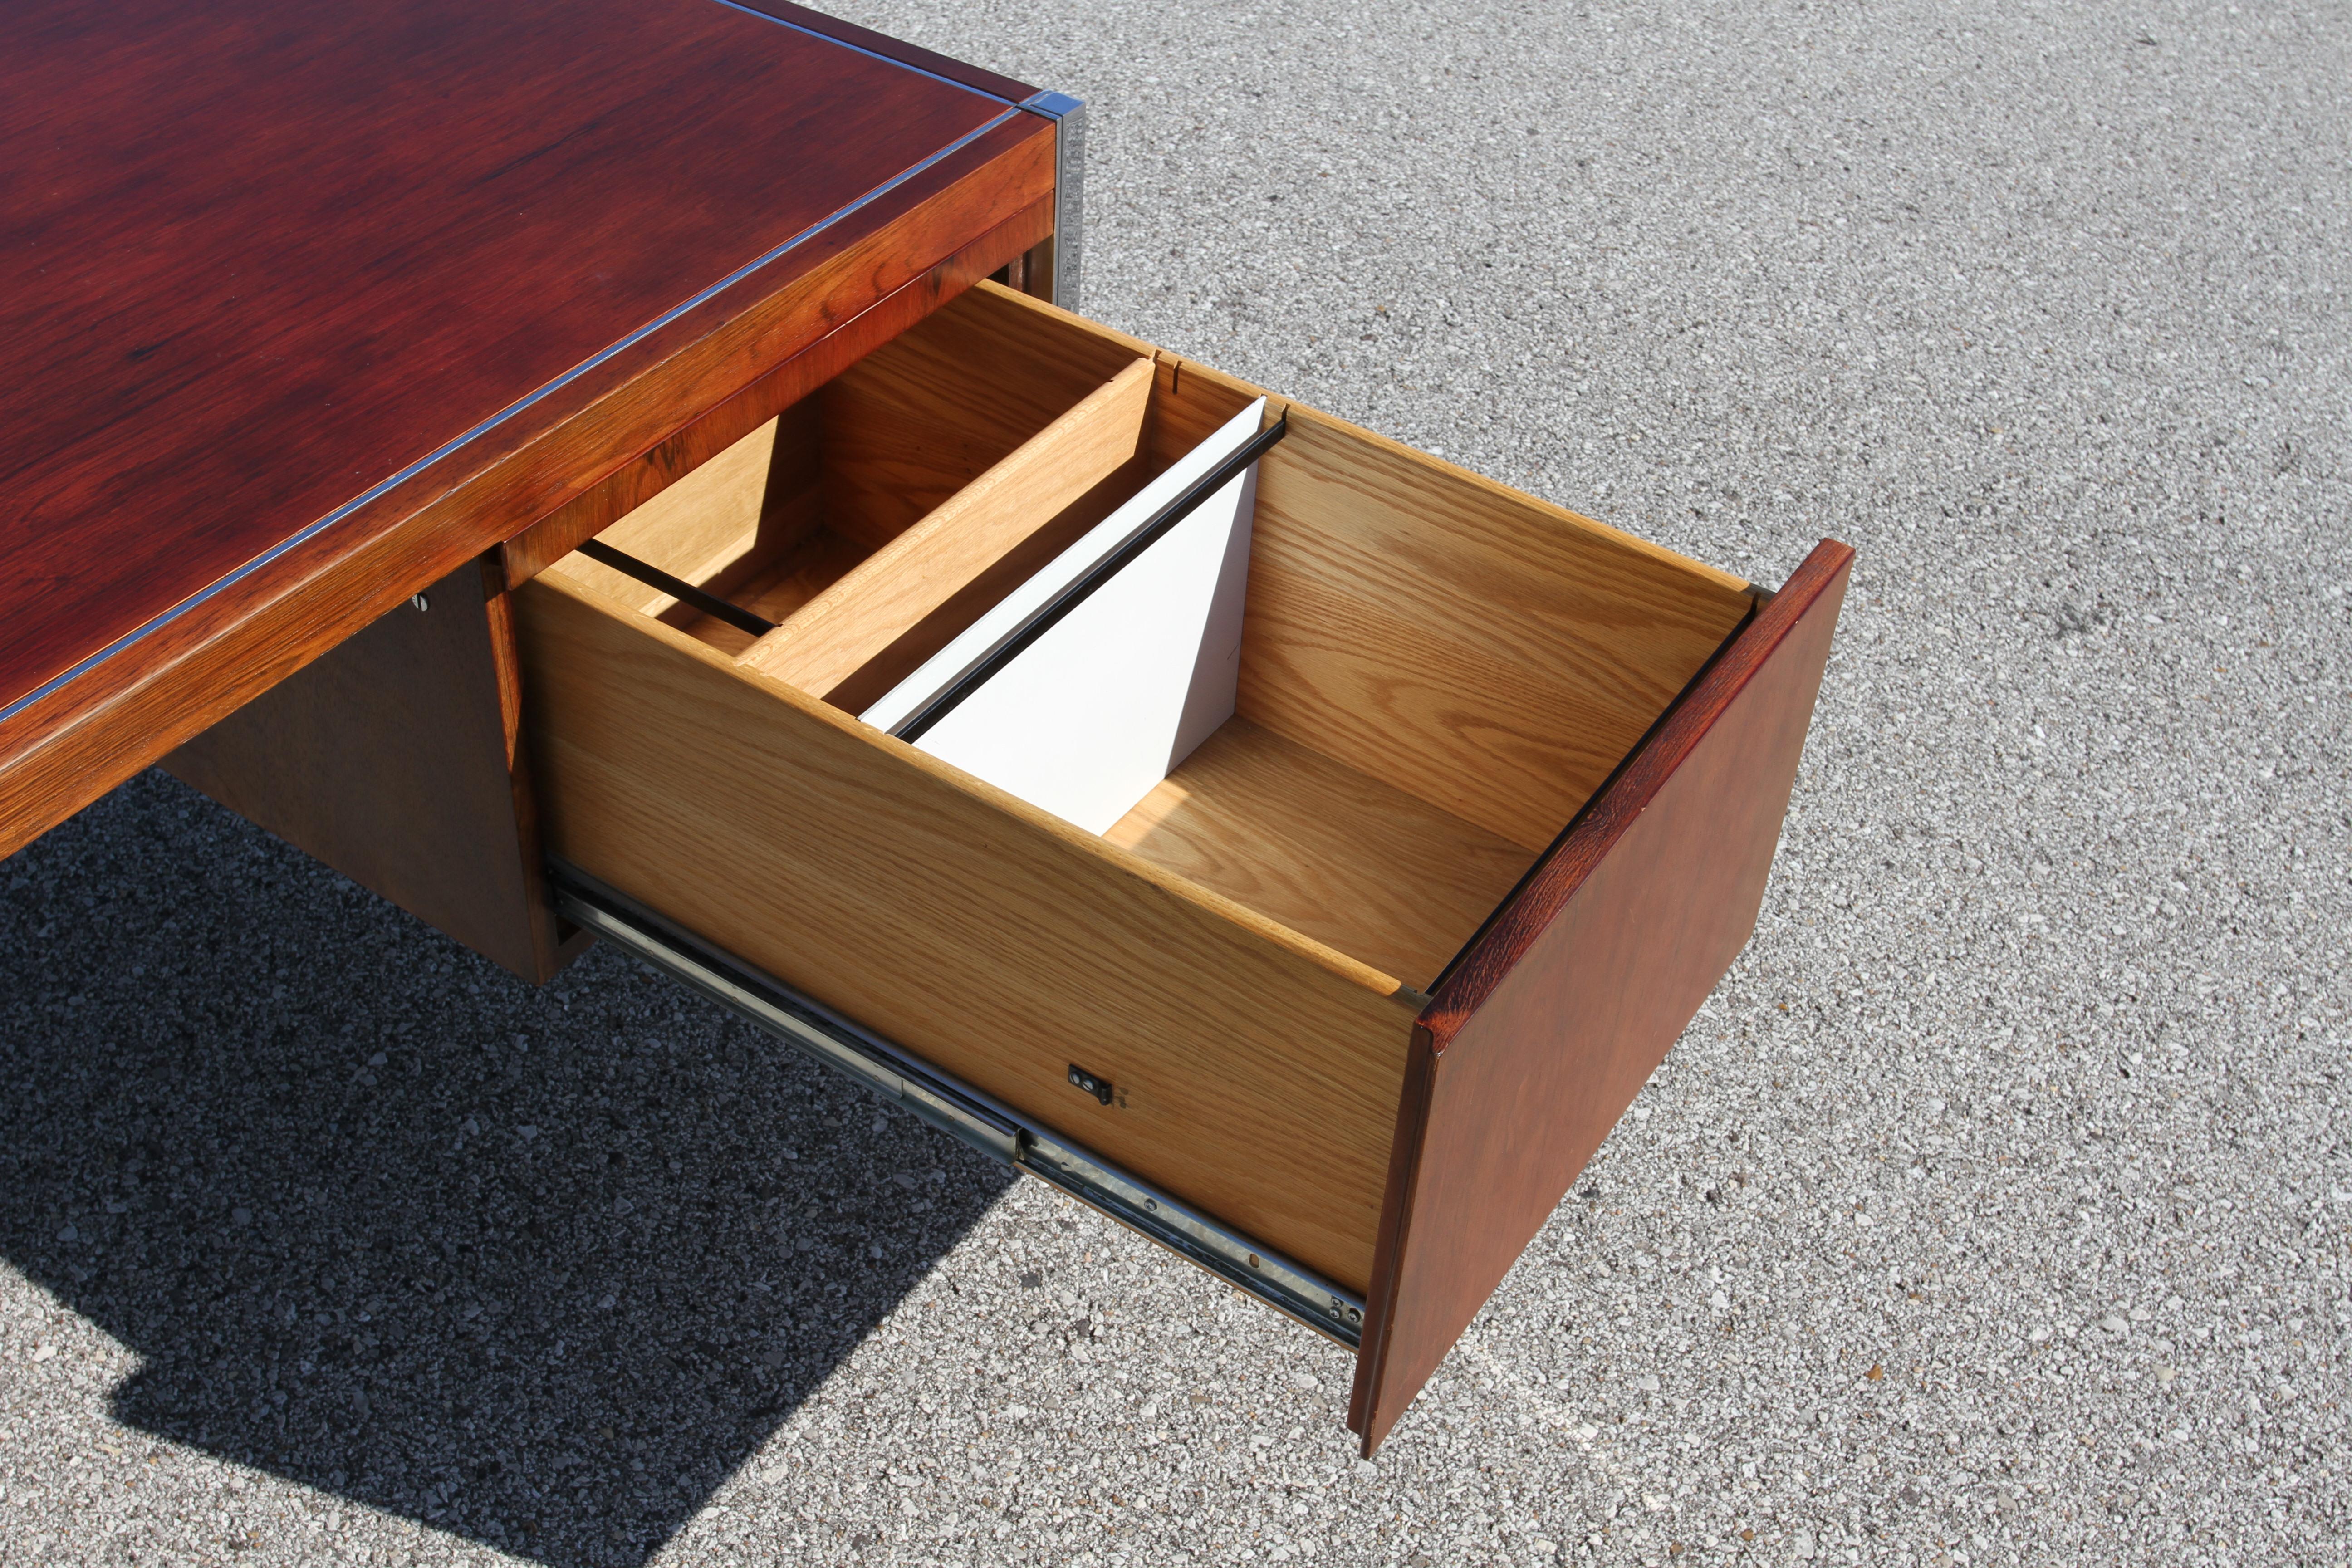 Richard Schultz for Knoll 1960s Mid-Century Modern Rosewood Executive Desk #4146 For Sale 10